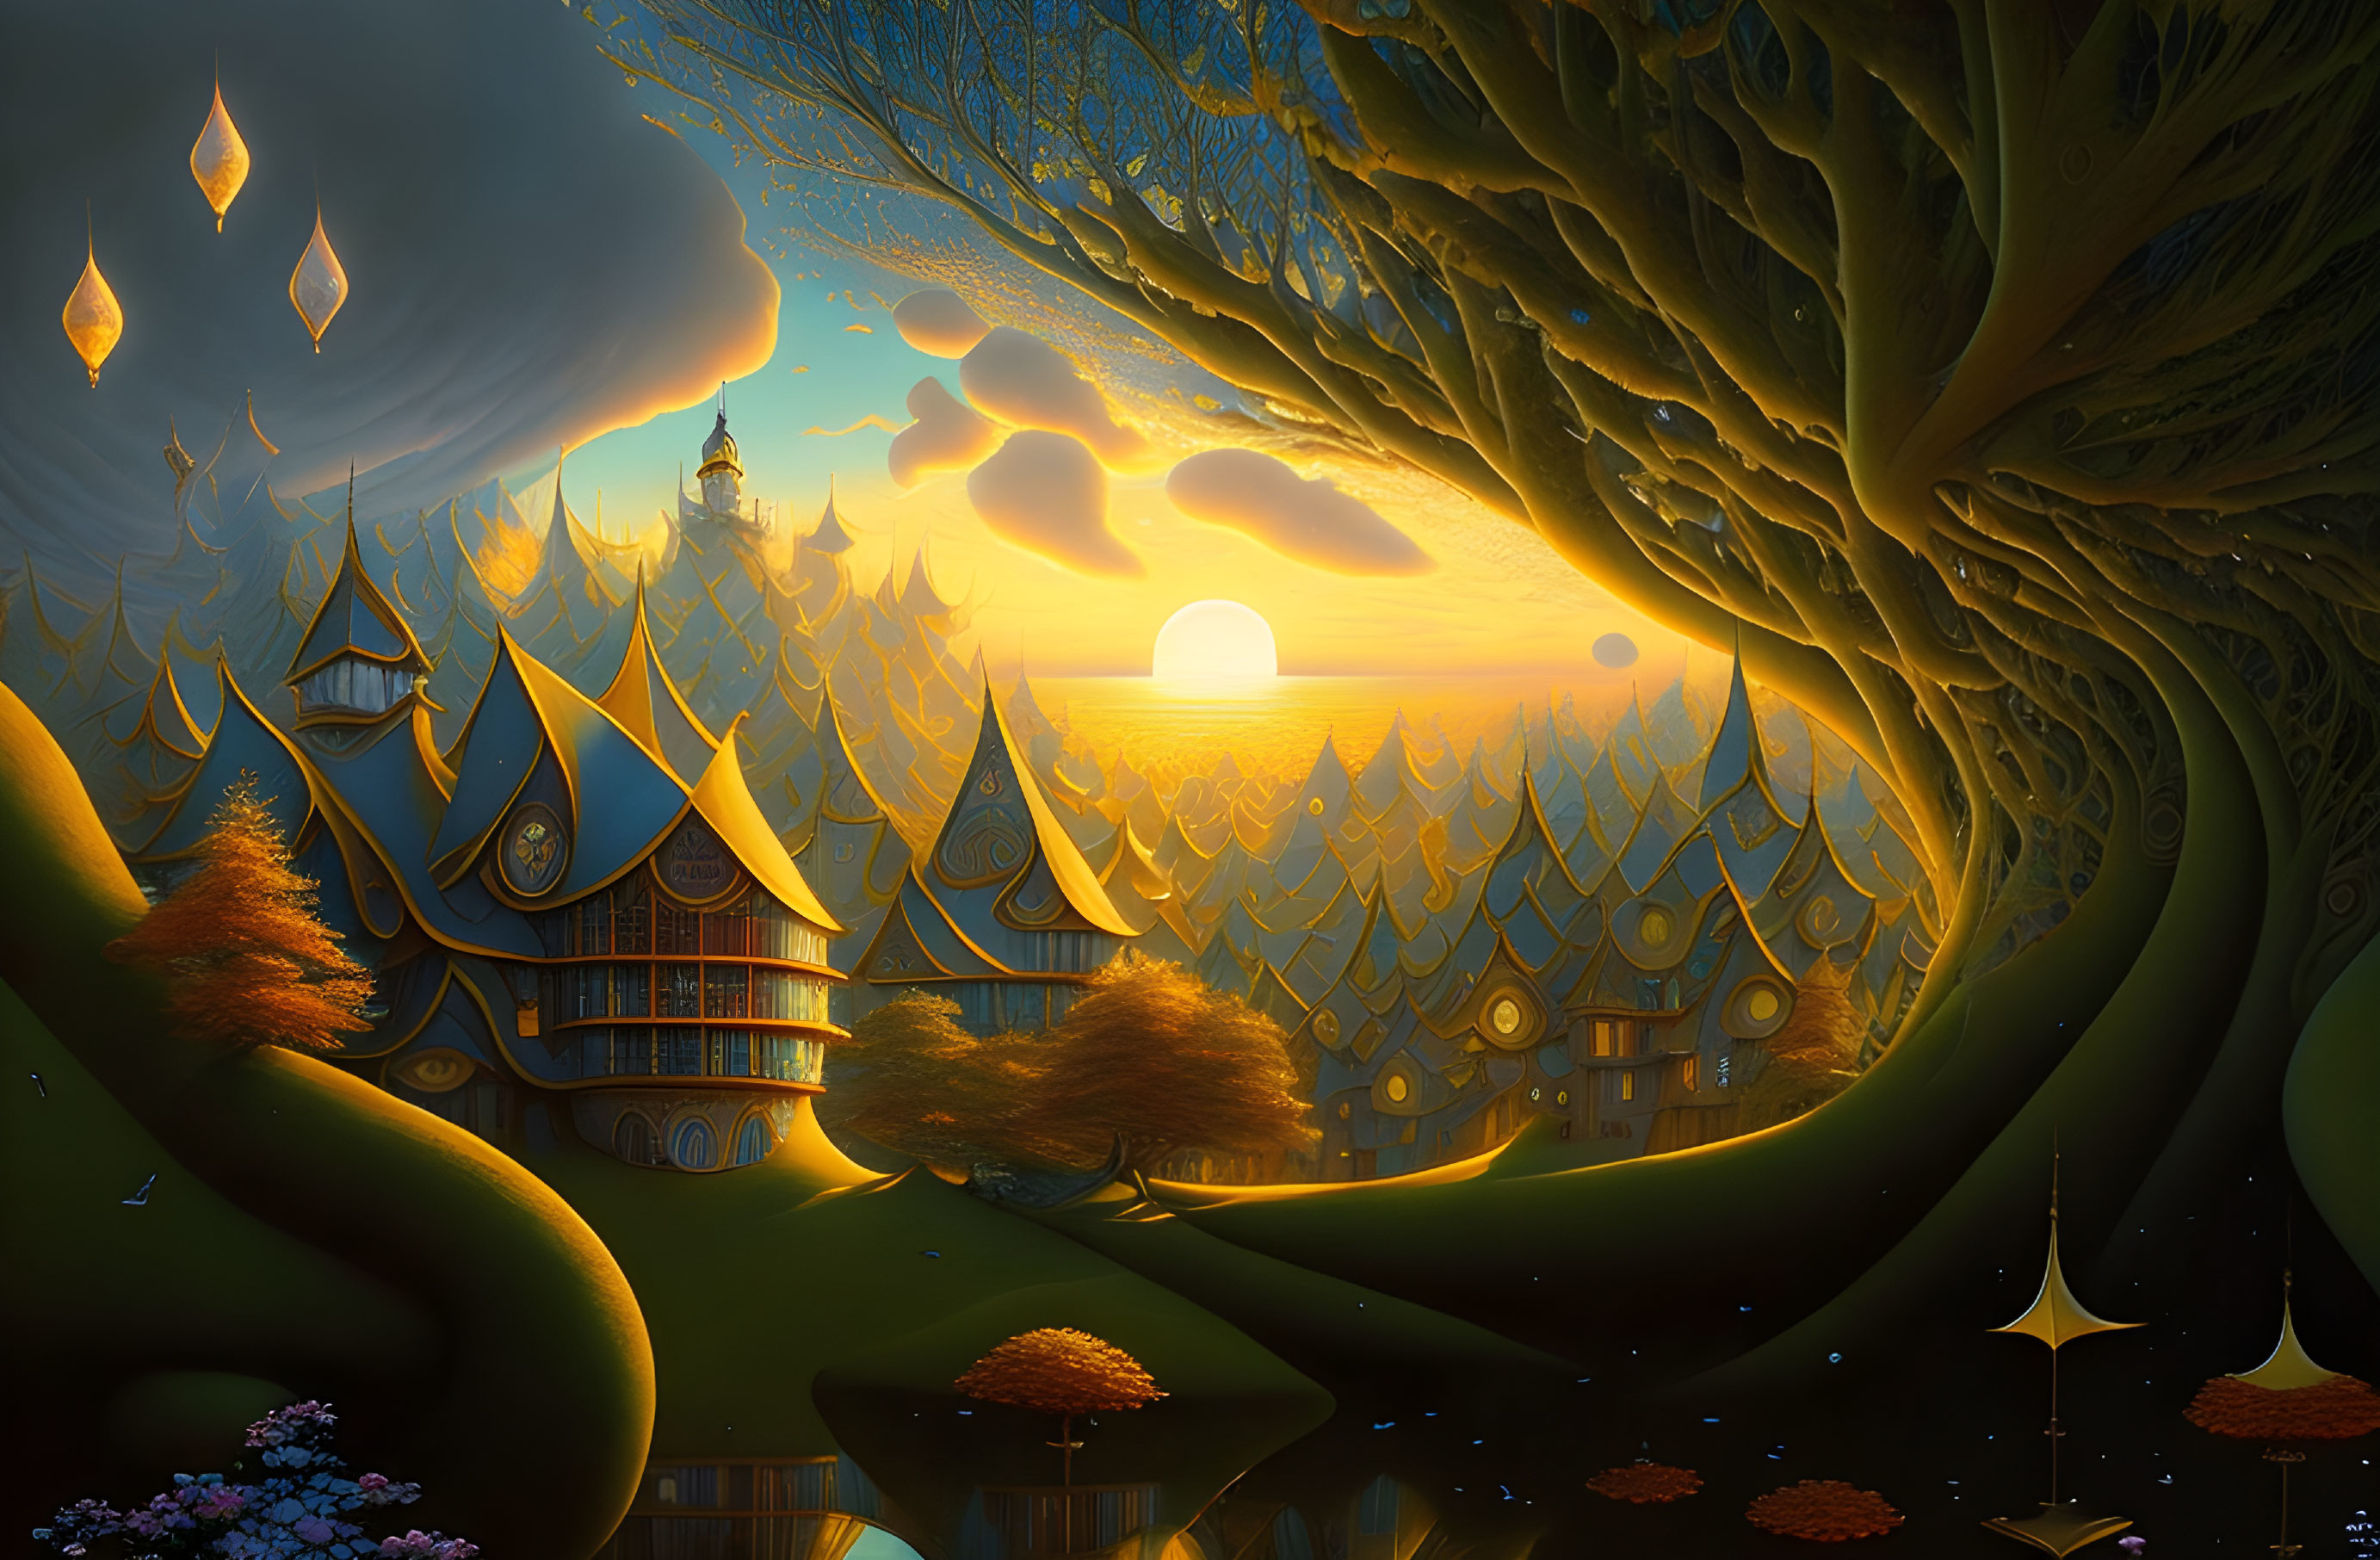 Fantastical sunset landscape with oversized intertwined trees and elaborate dwellings reflected in tranquil water under a sky